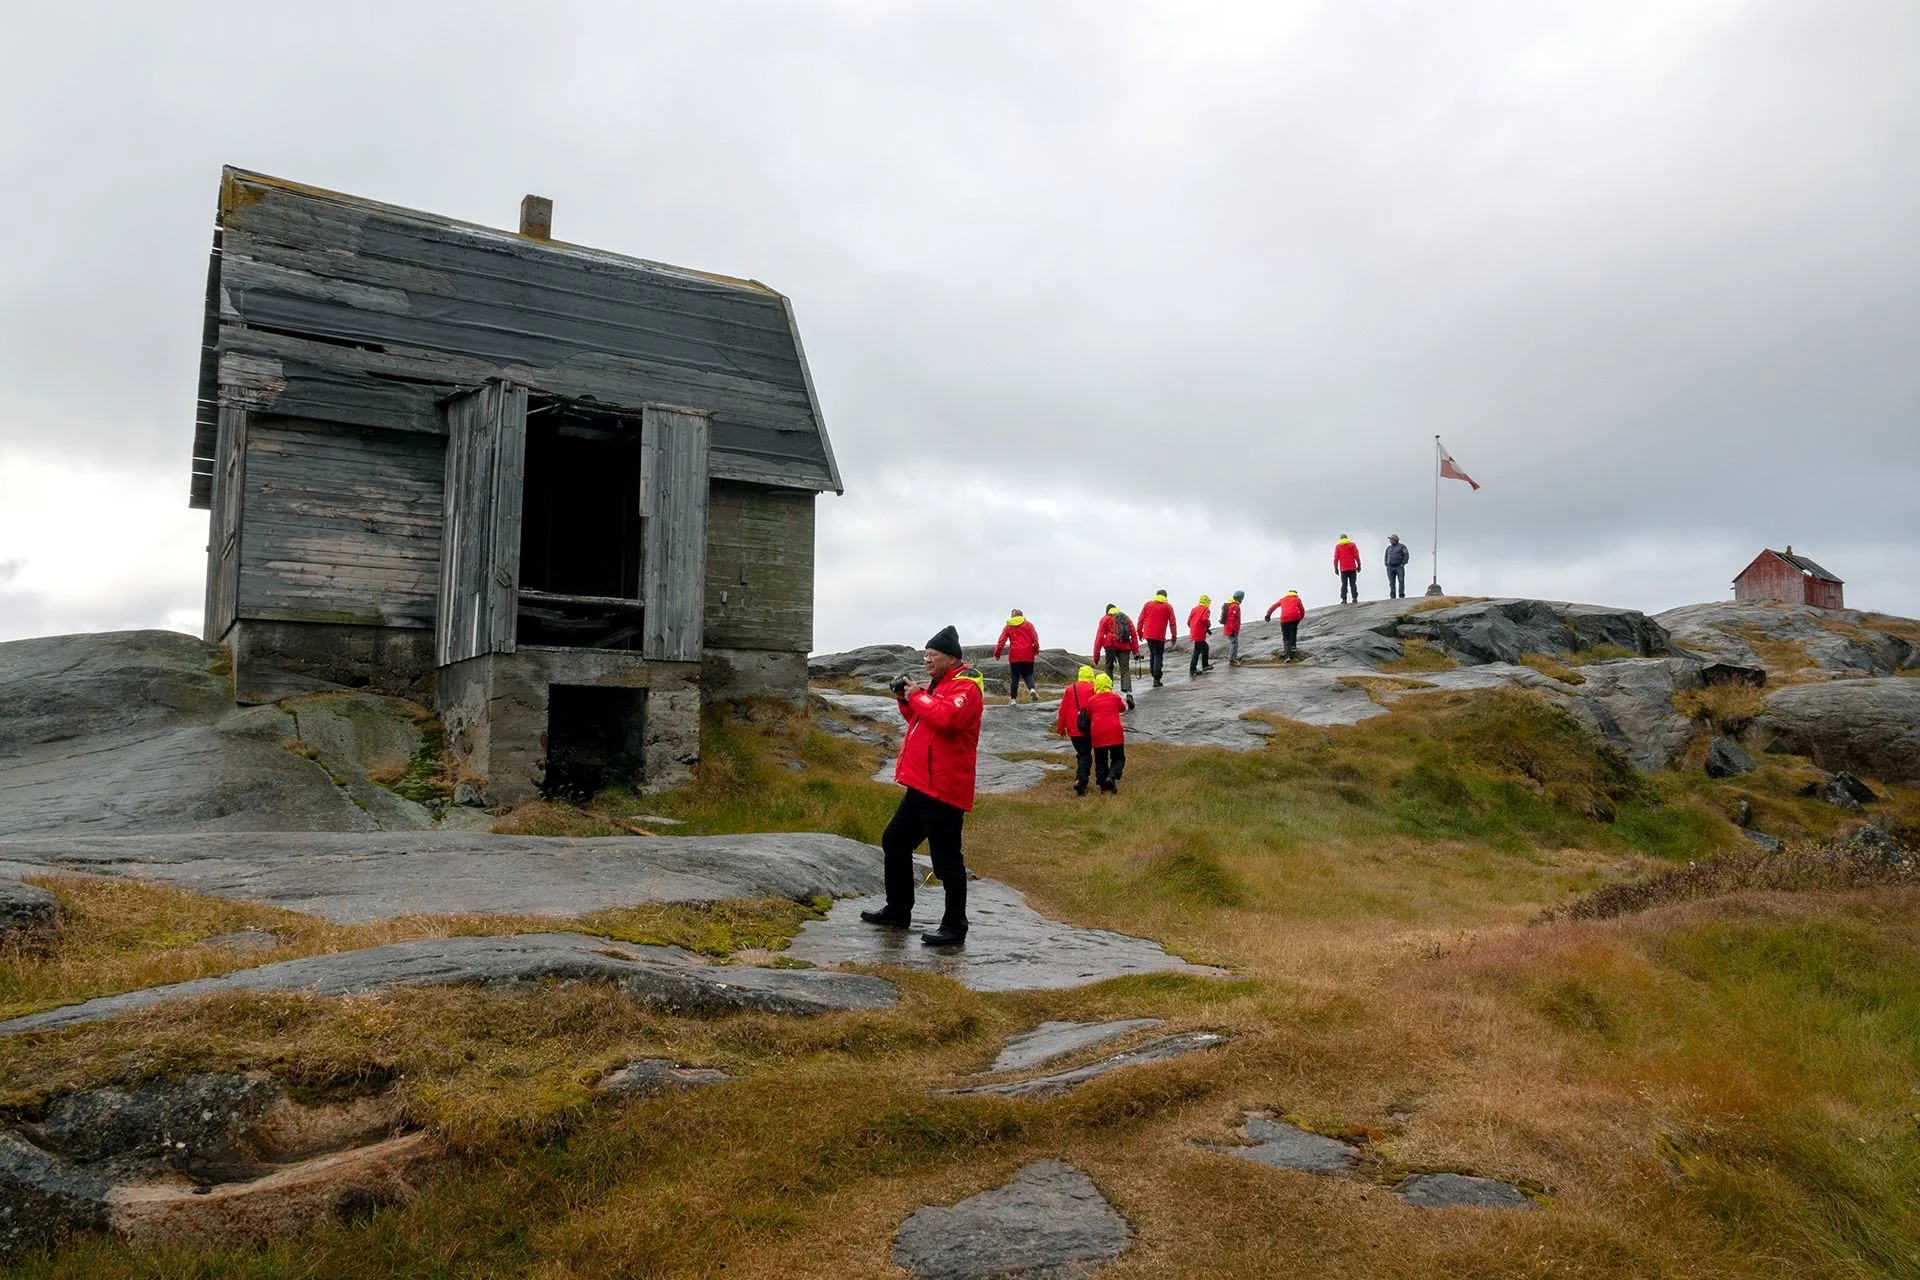 Guests hiking through Sisimiut in Greenland.